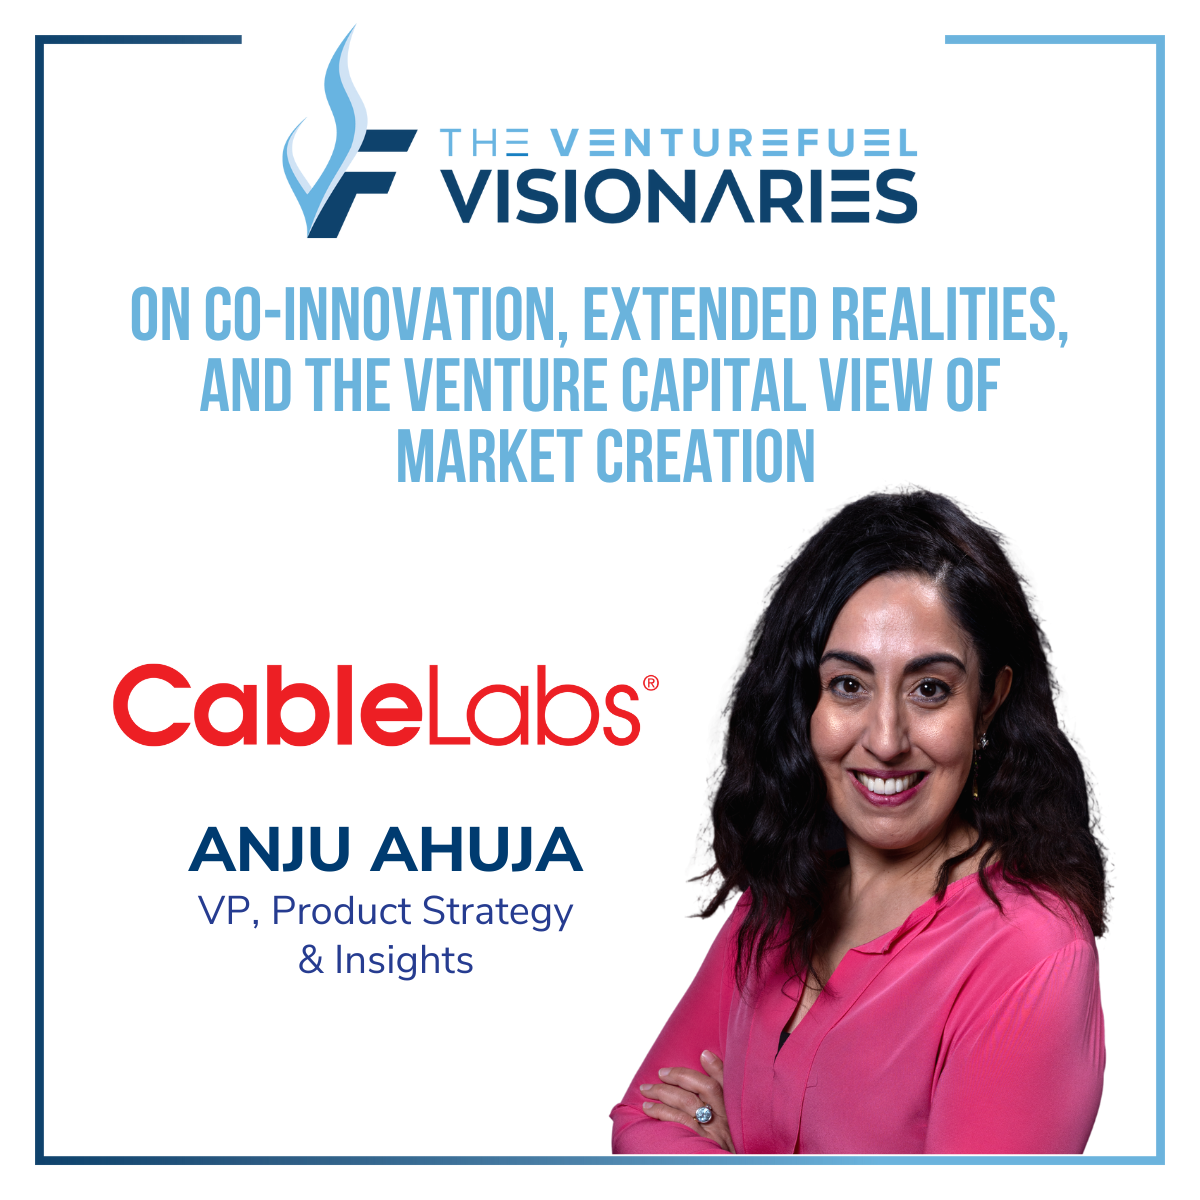 10G – CableLabs VP of Product Strategy and Insights Anju Ahuja